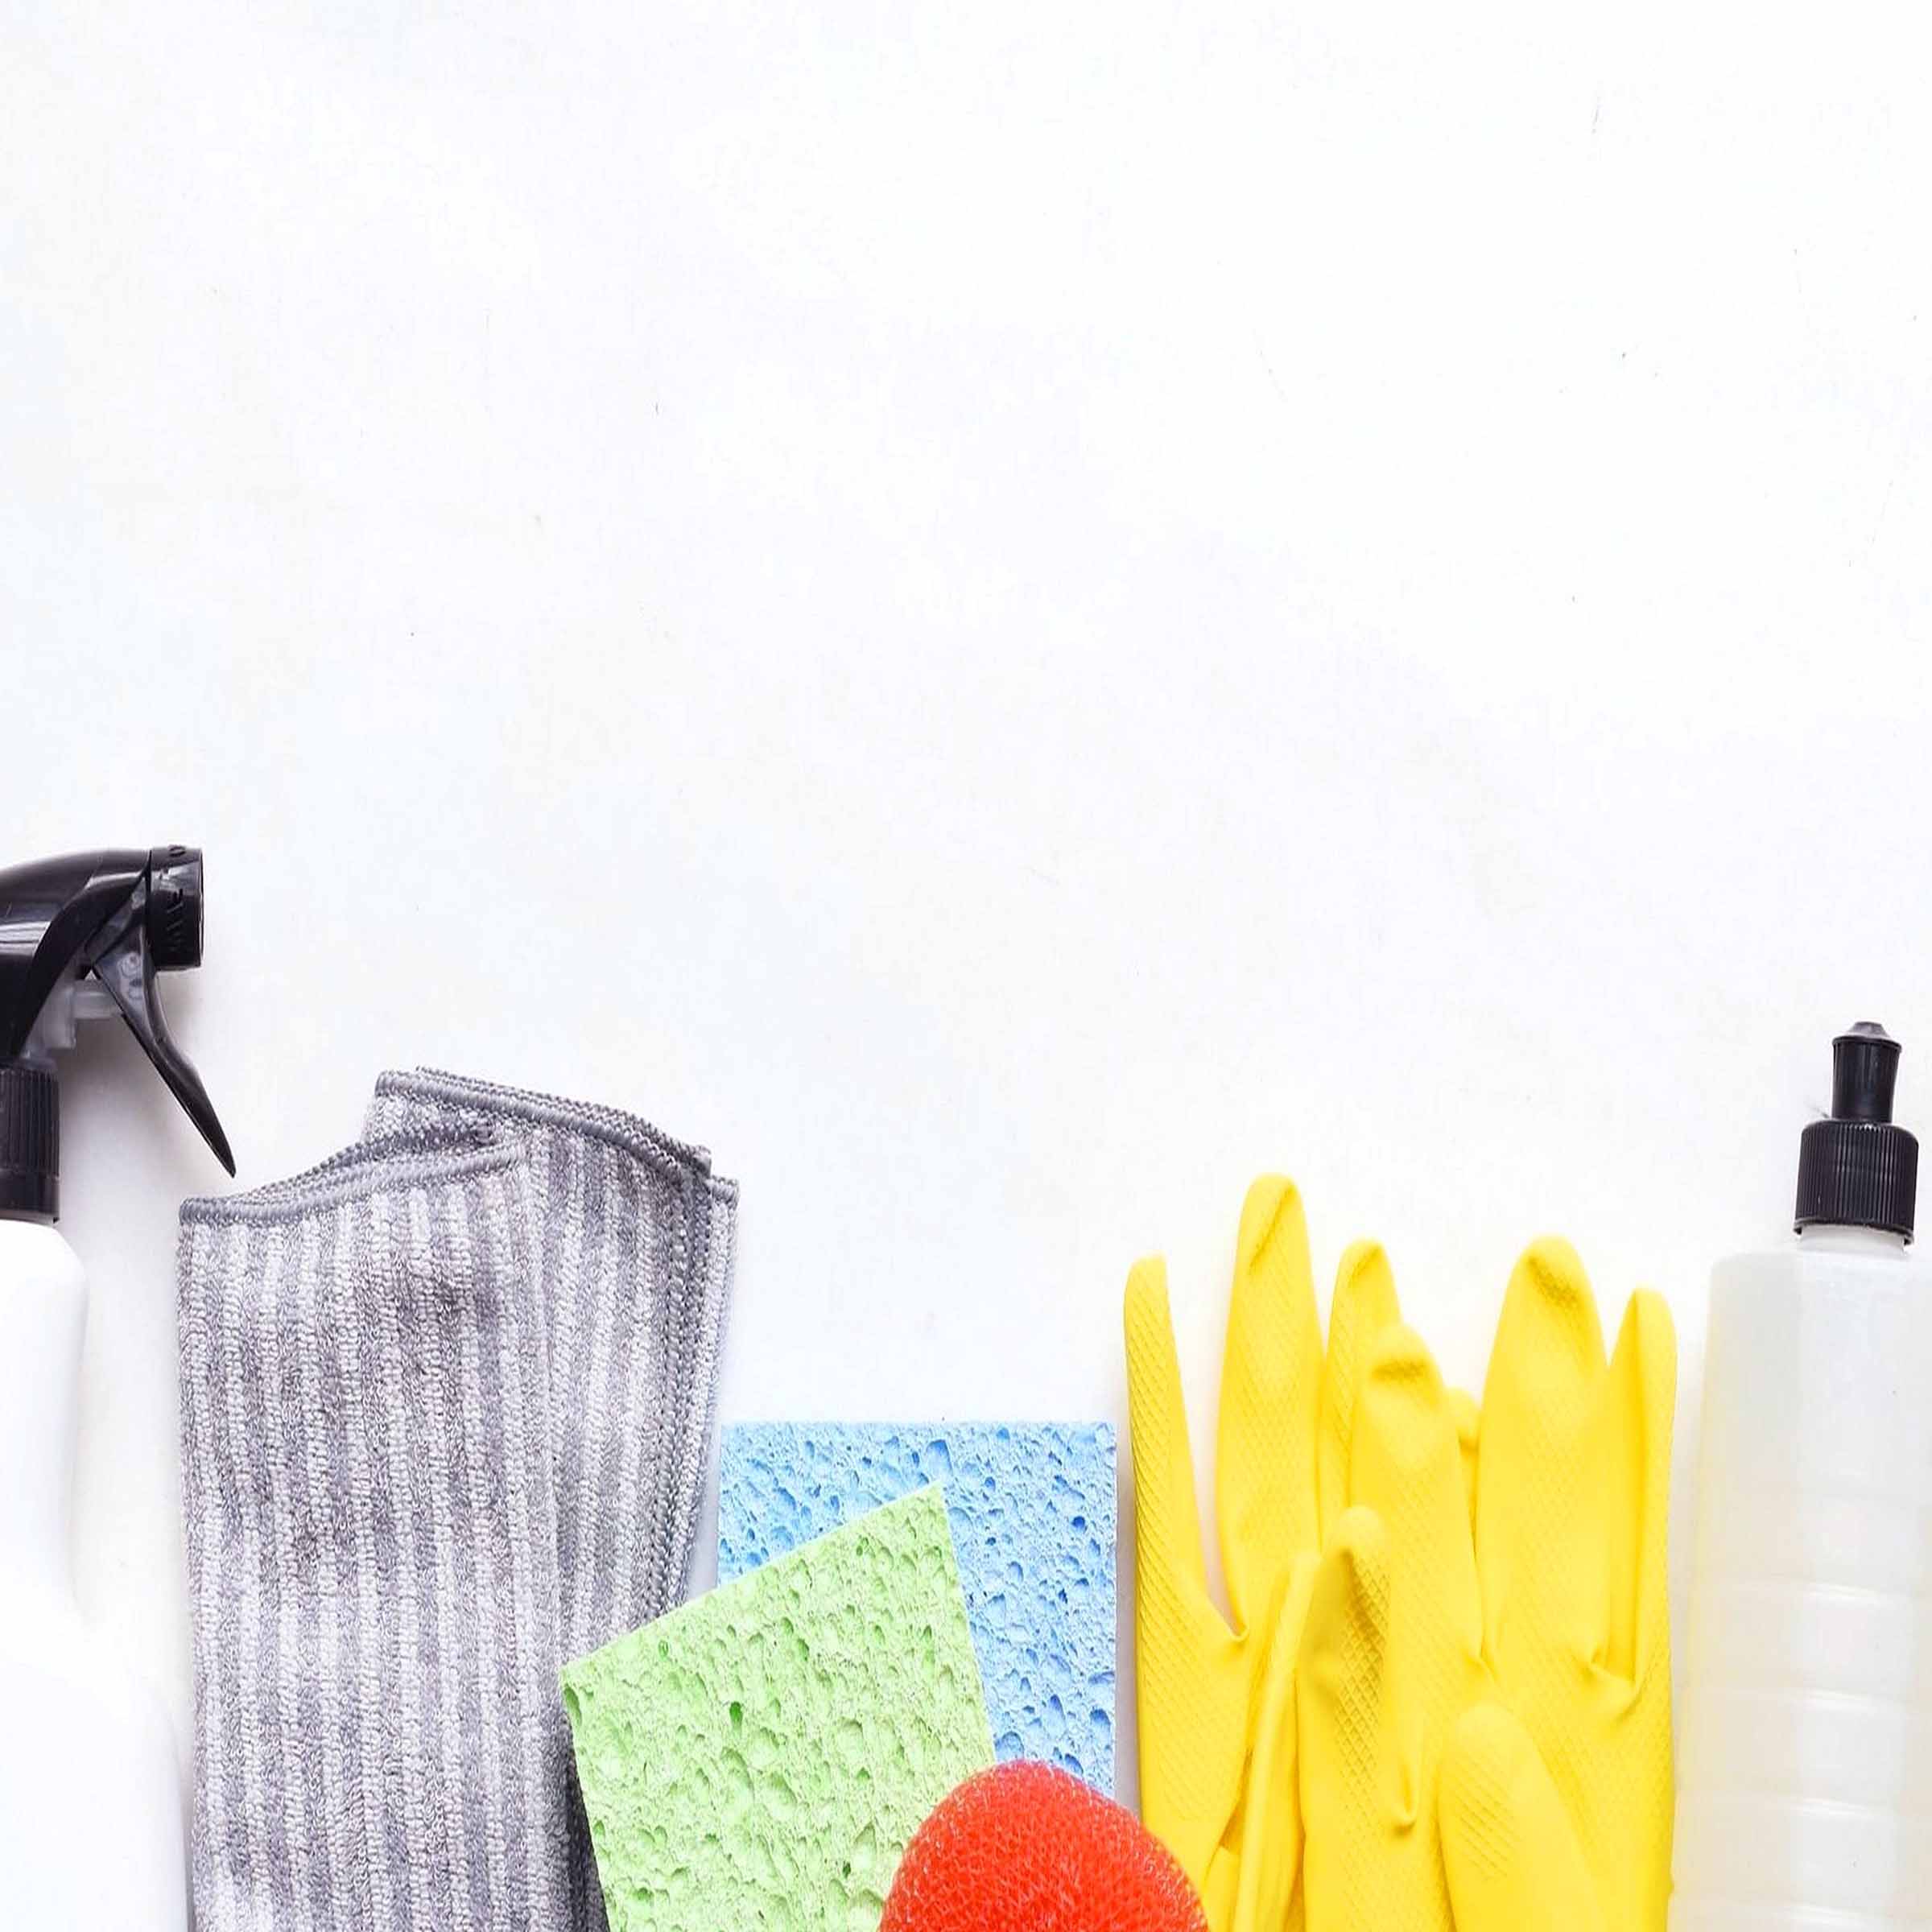 How To Contact Companies To Offer Your Cleaning Services